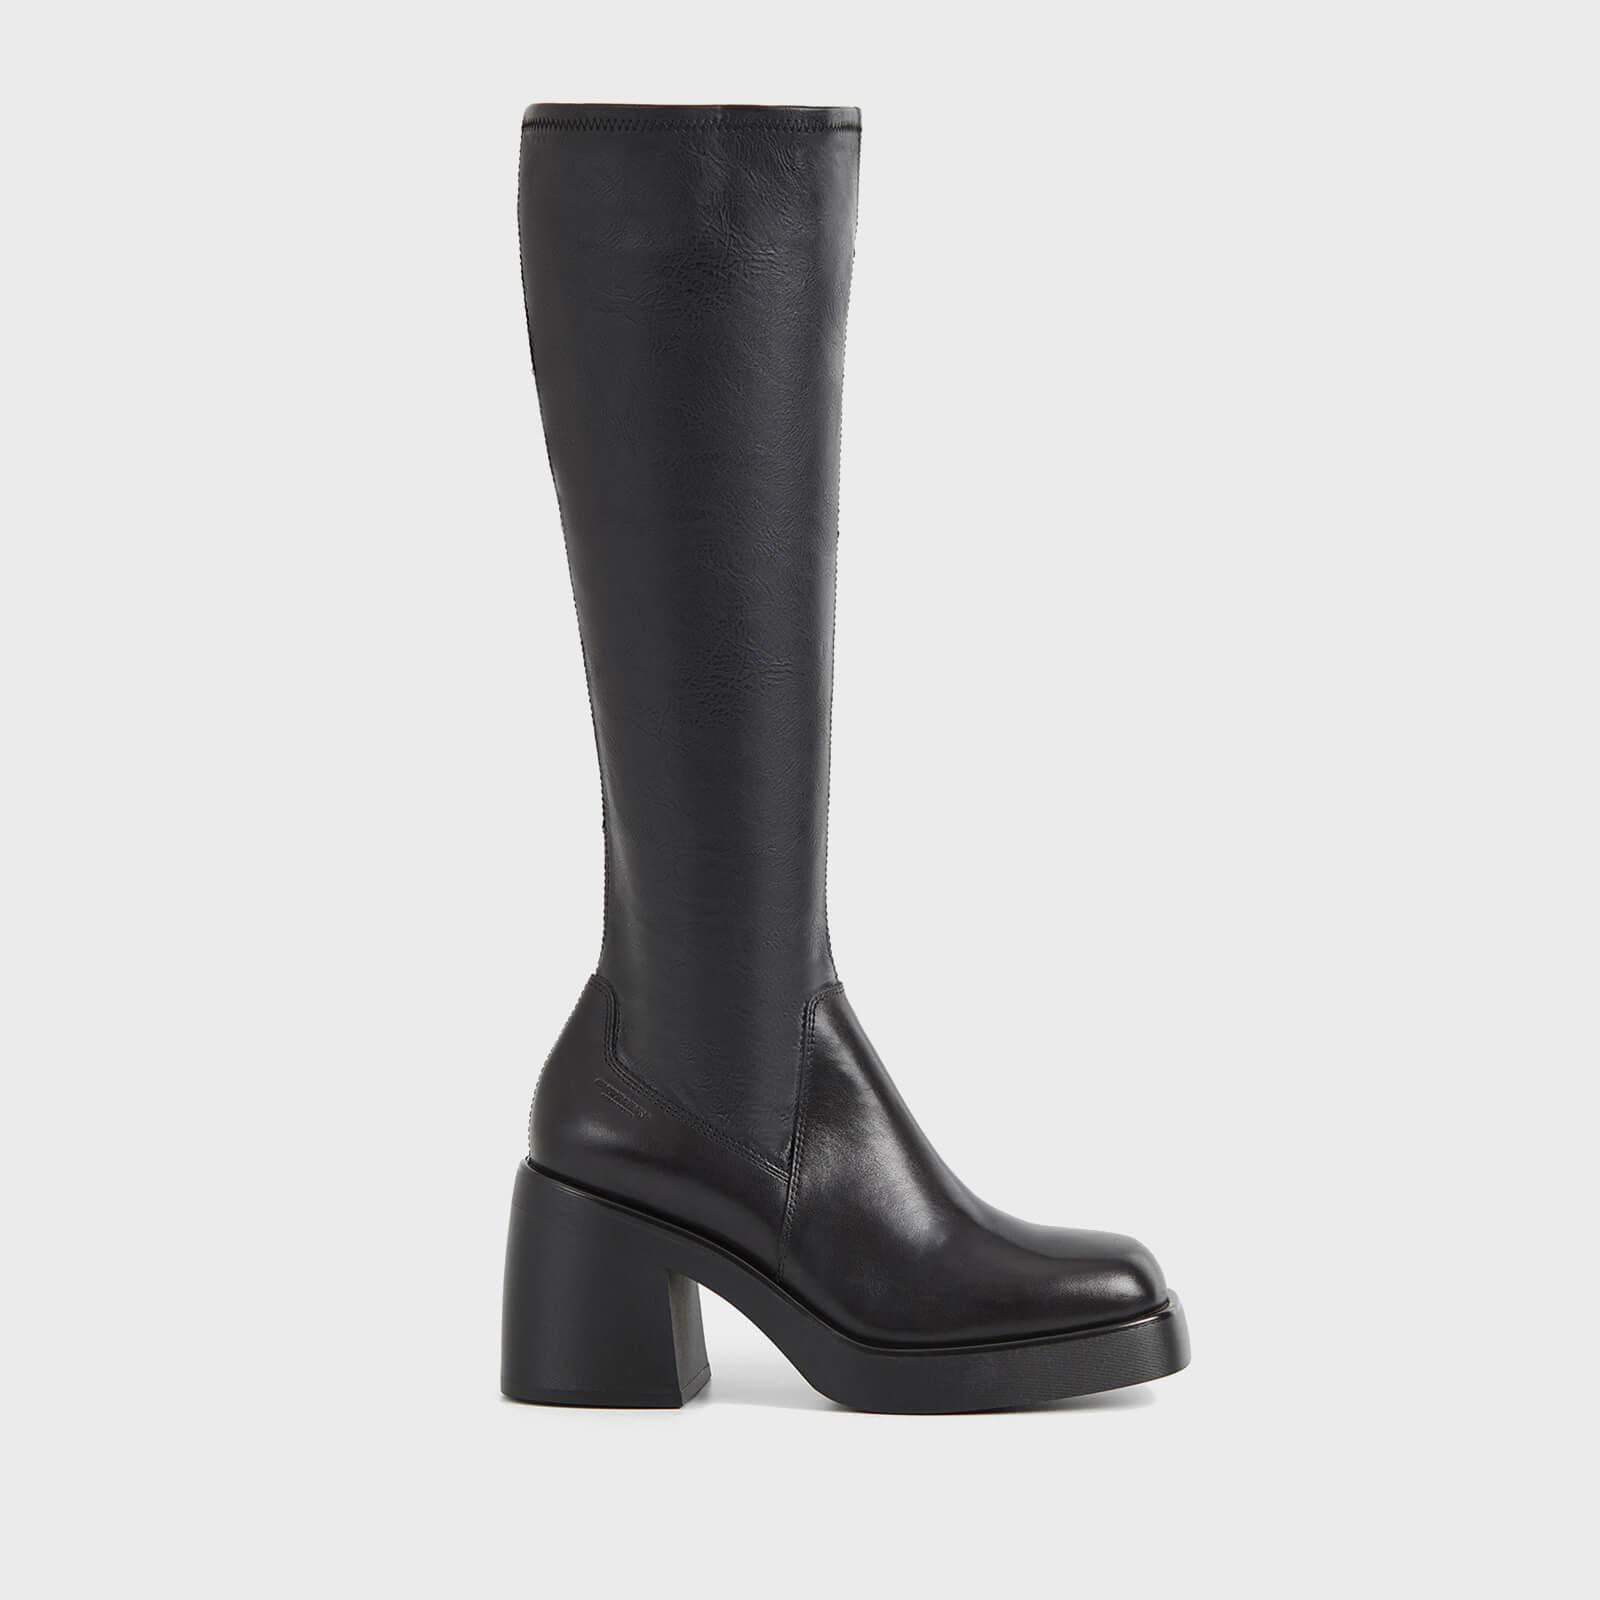 Vagabond Shoemakers Brooke Stretch Leather Heeled Knee High Boots in ...